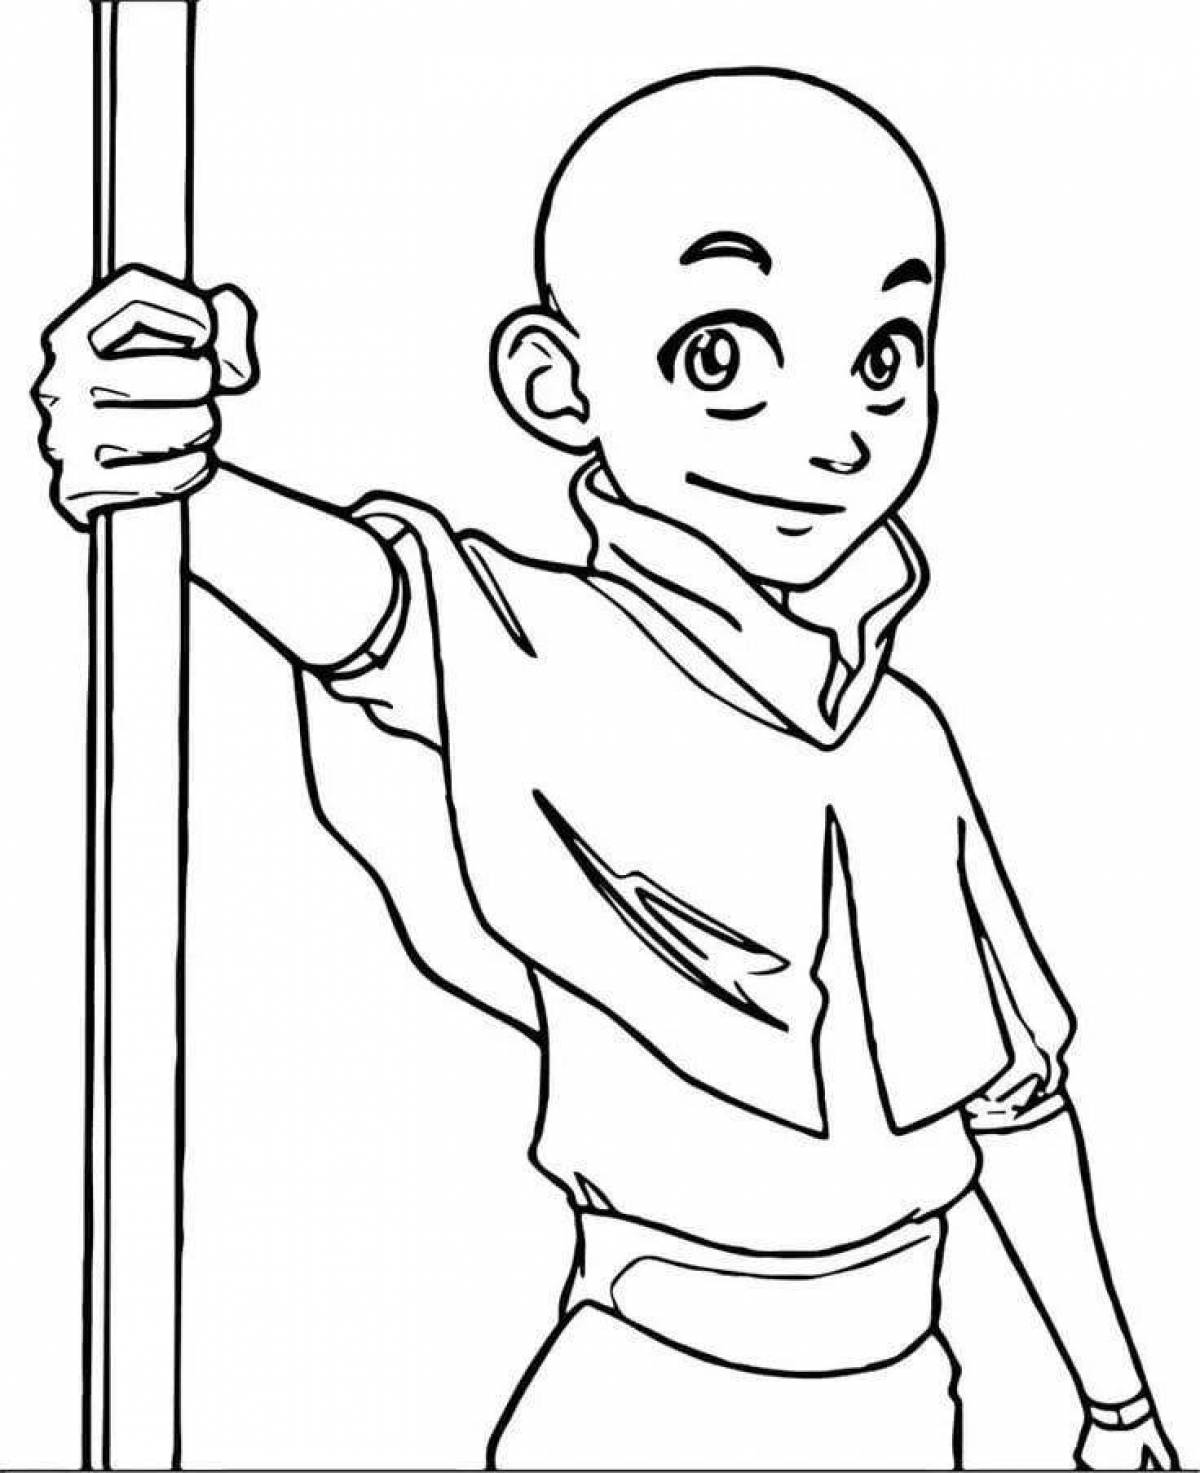 Playful avatar coloring page